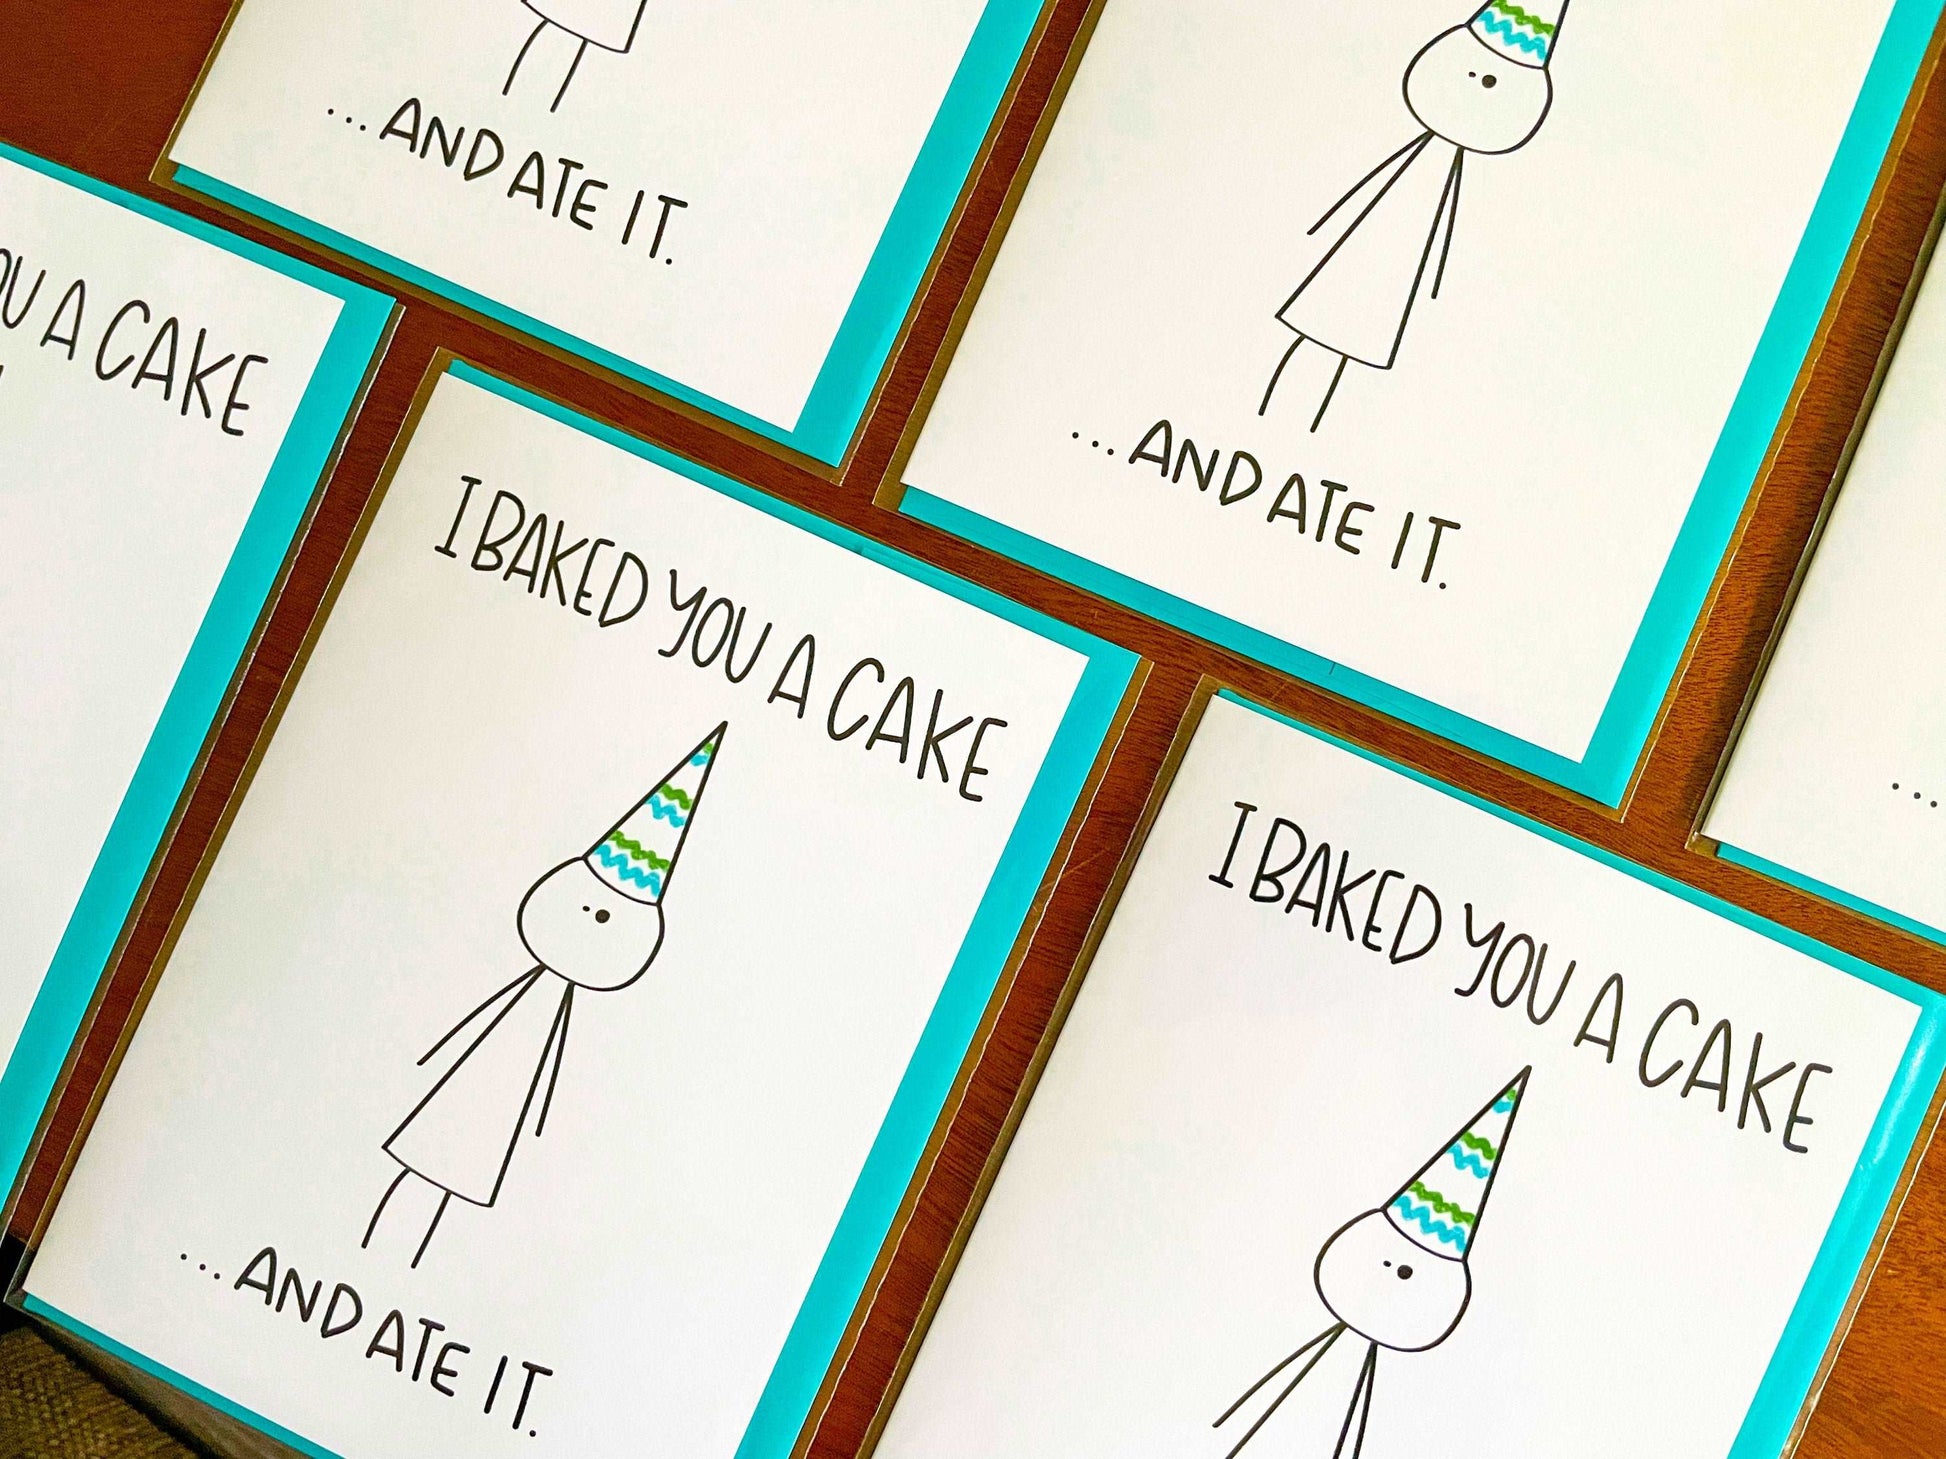 Baked You A Cake Funny Birthday Card by StoneDonut Design